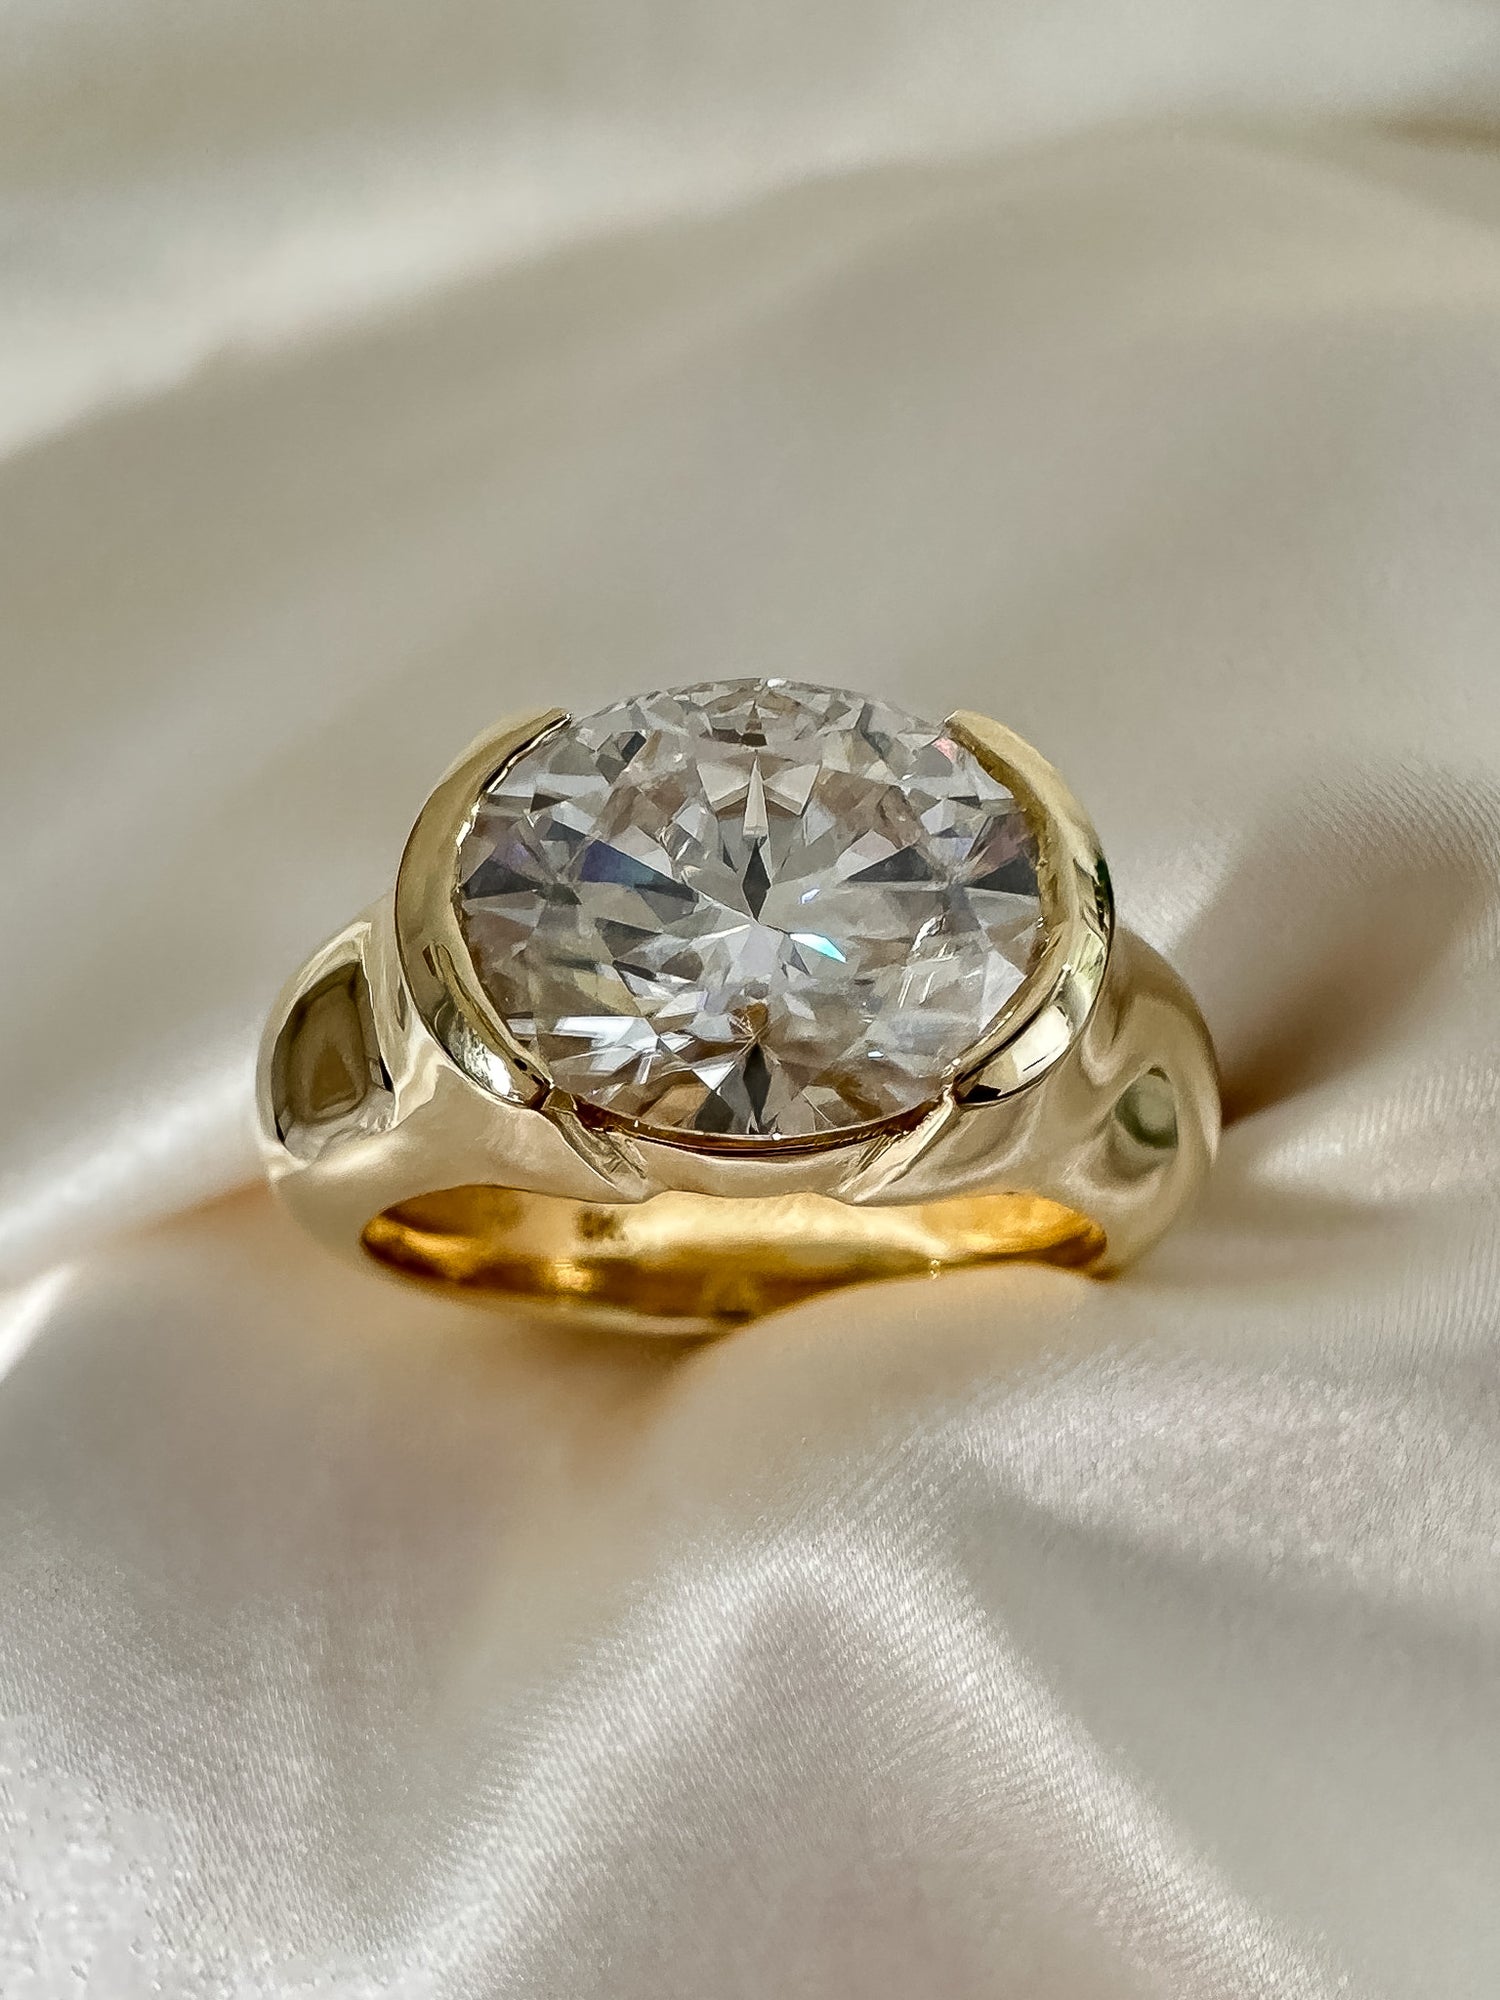 Fine jewellery, South Africa. Jewellery Cape Town. Engagement rings, South Africa.